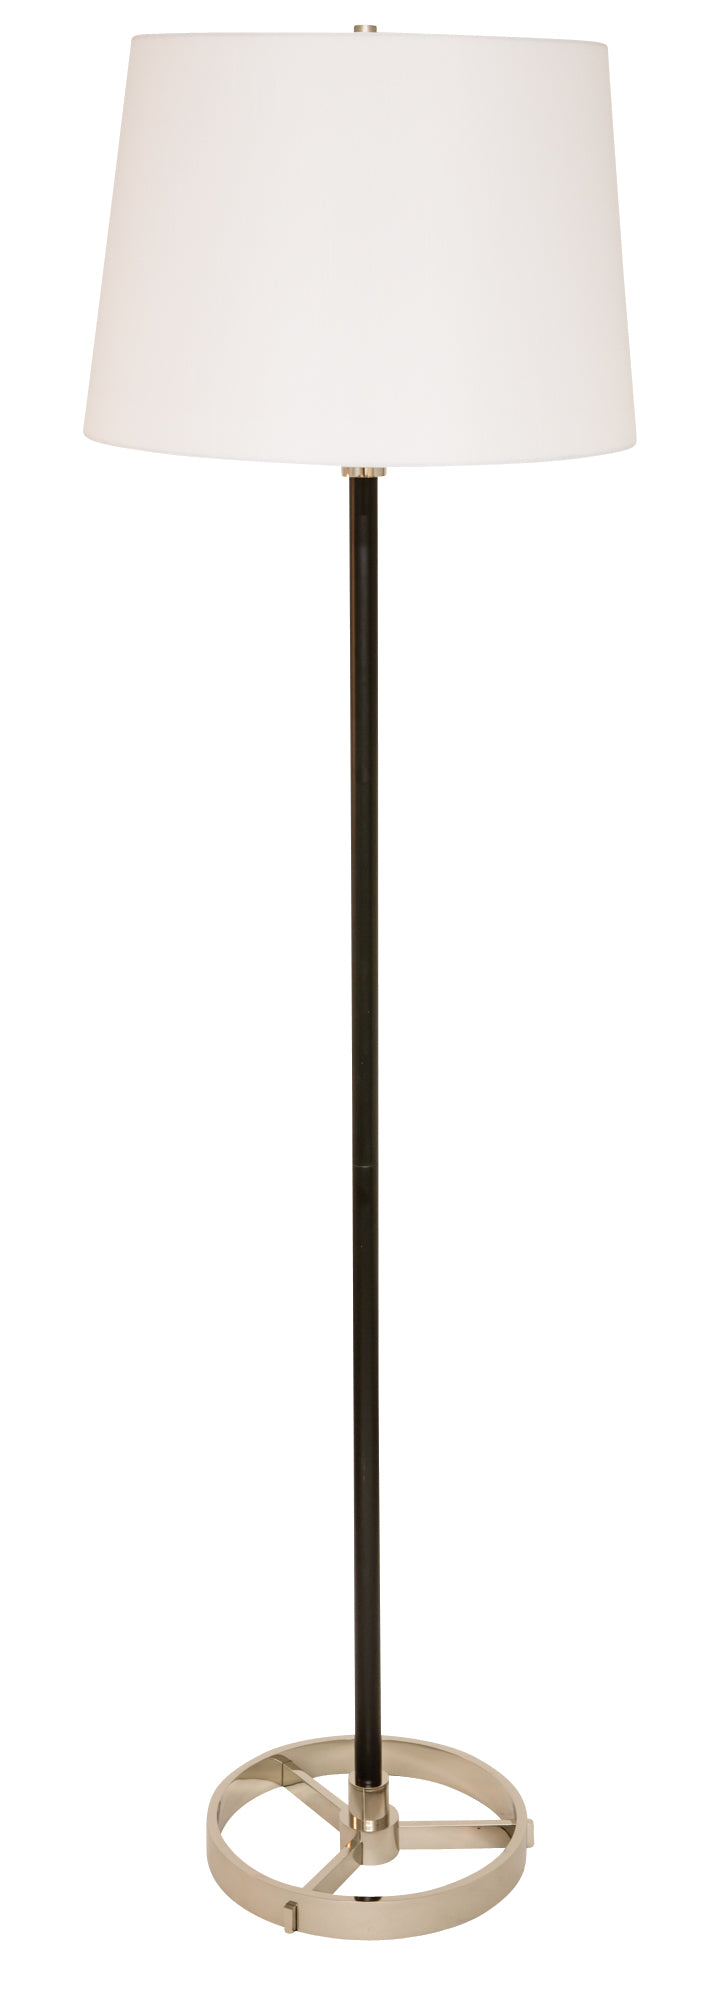 House of Troy 62" Morgan Floor Lamp in Black with Polished Nickel M600-BLKPN